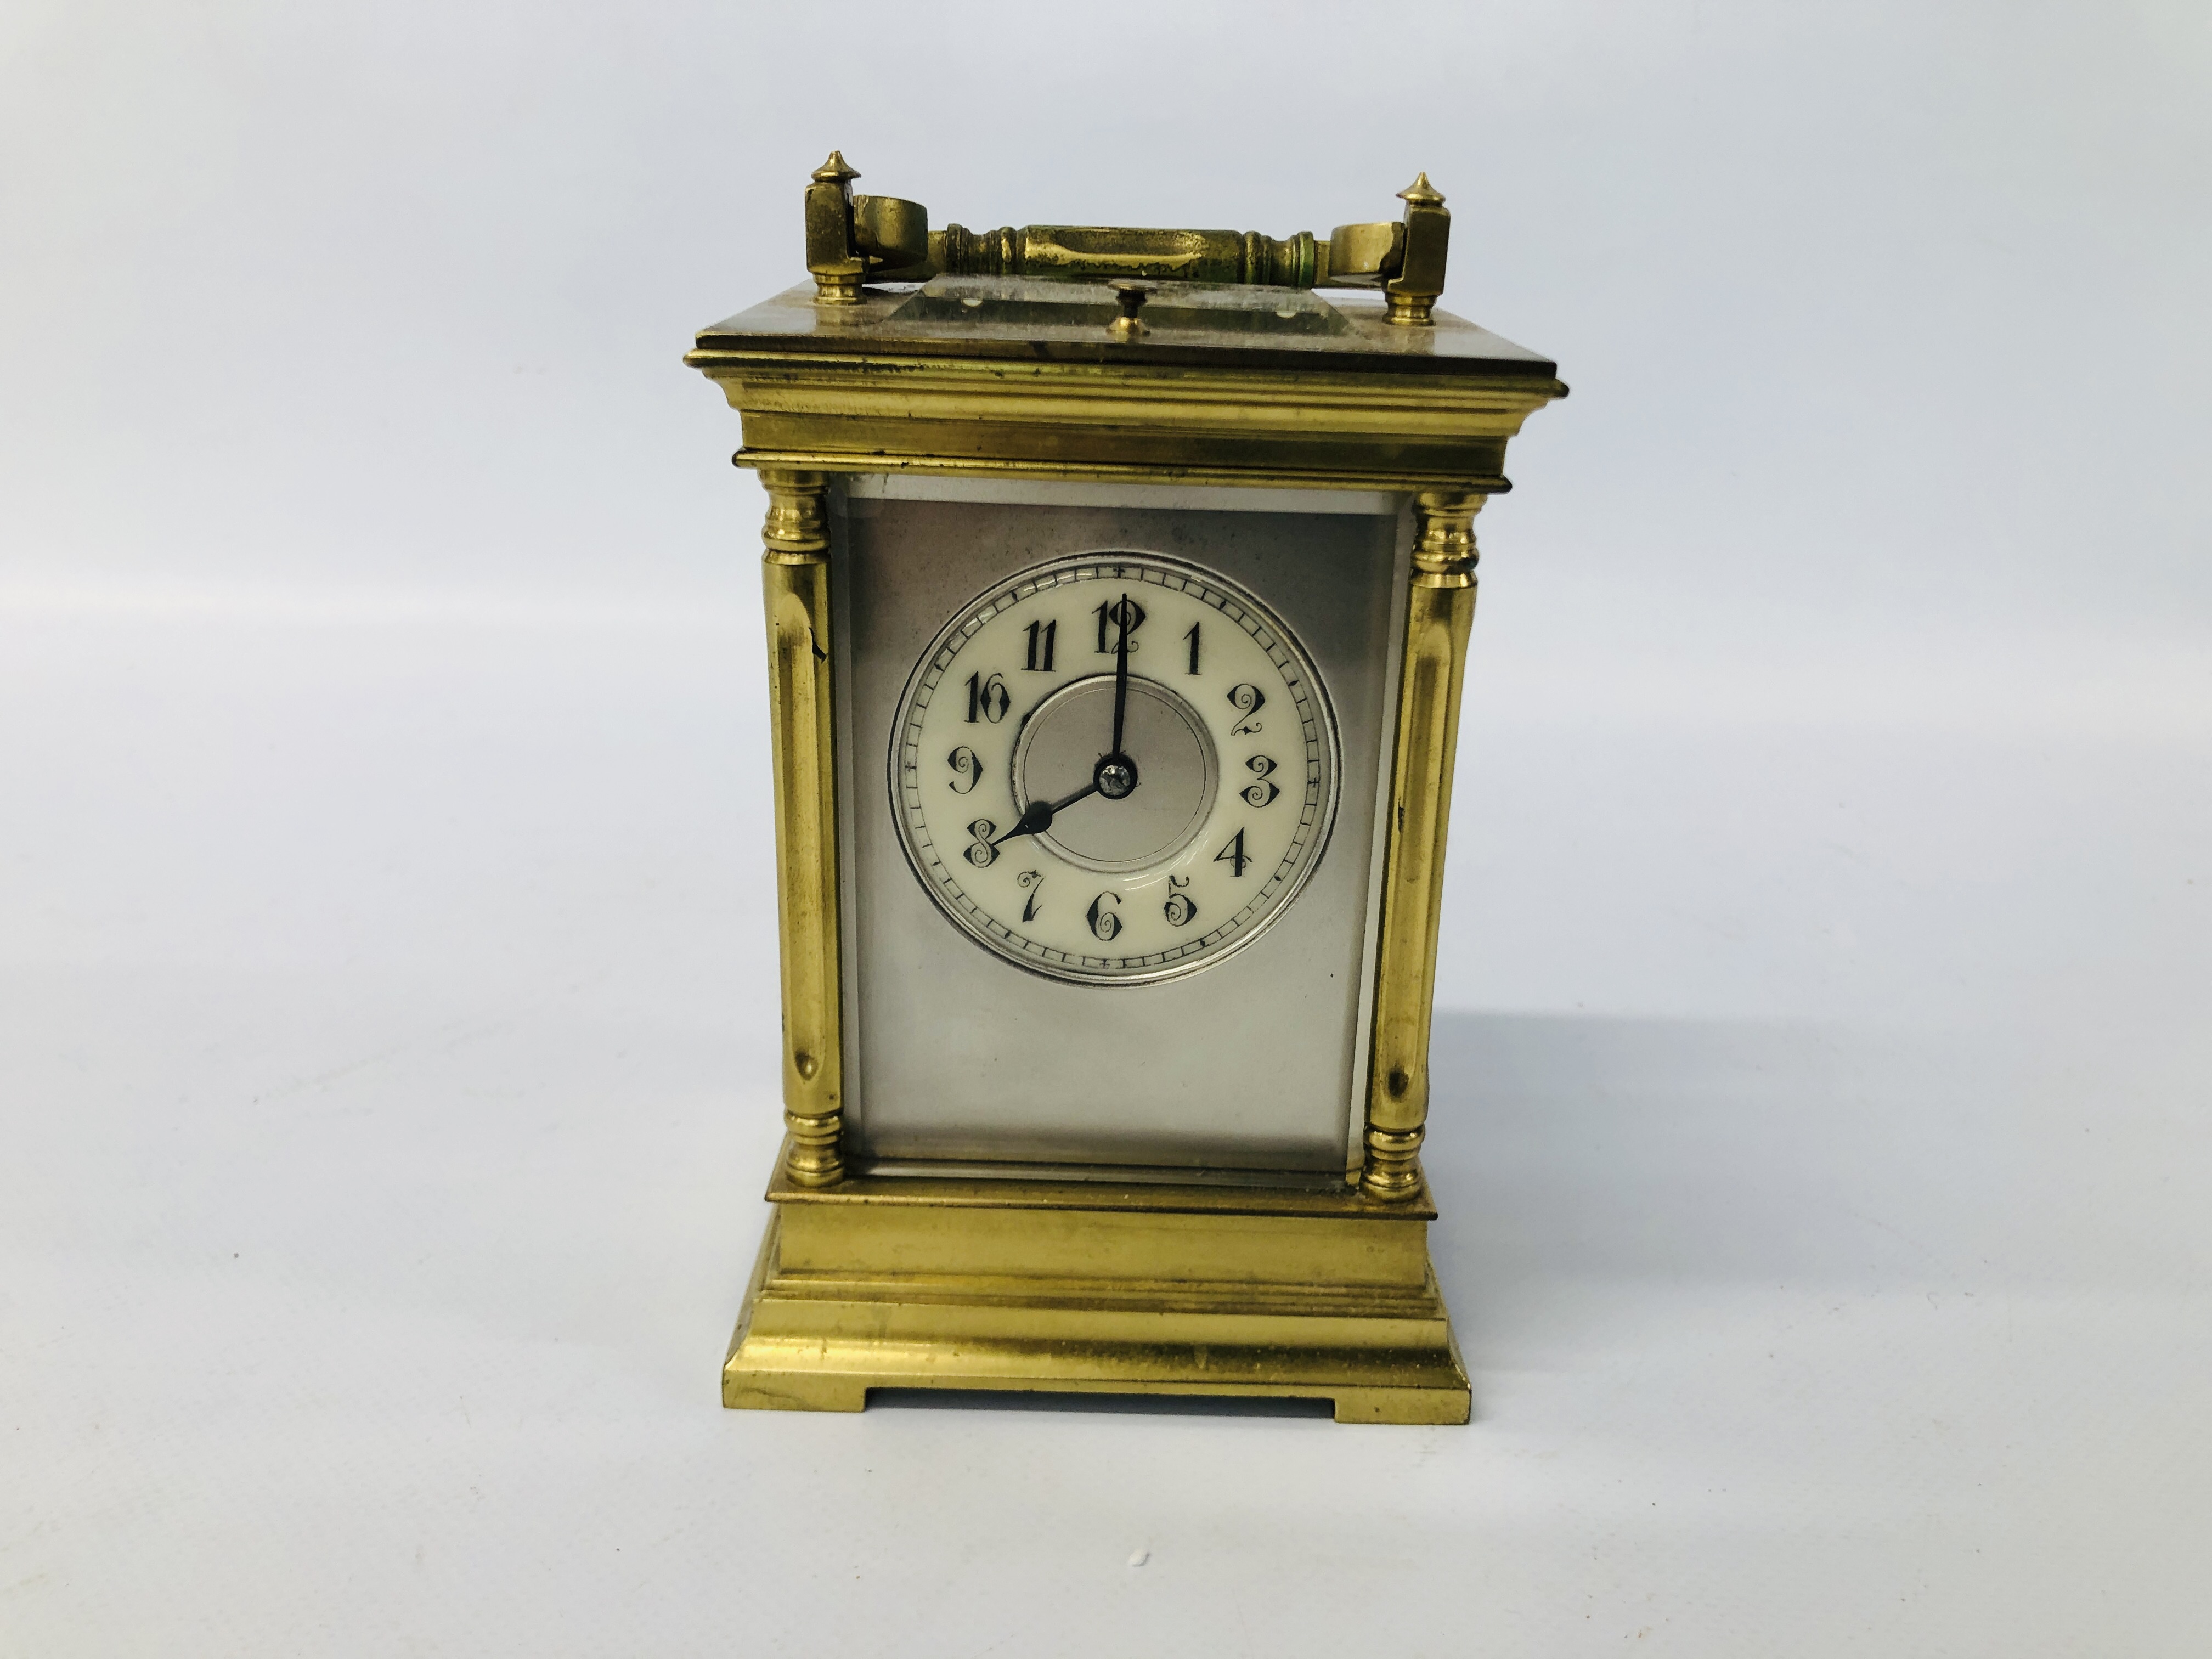 ANTIQUE BRASS CARRIDGE CLOCK WITH ENAMELLED FACE (REQUIRES ATTENTION TO THE REAR GLASS) H 14CM.